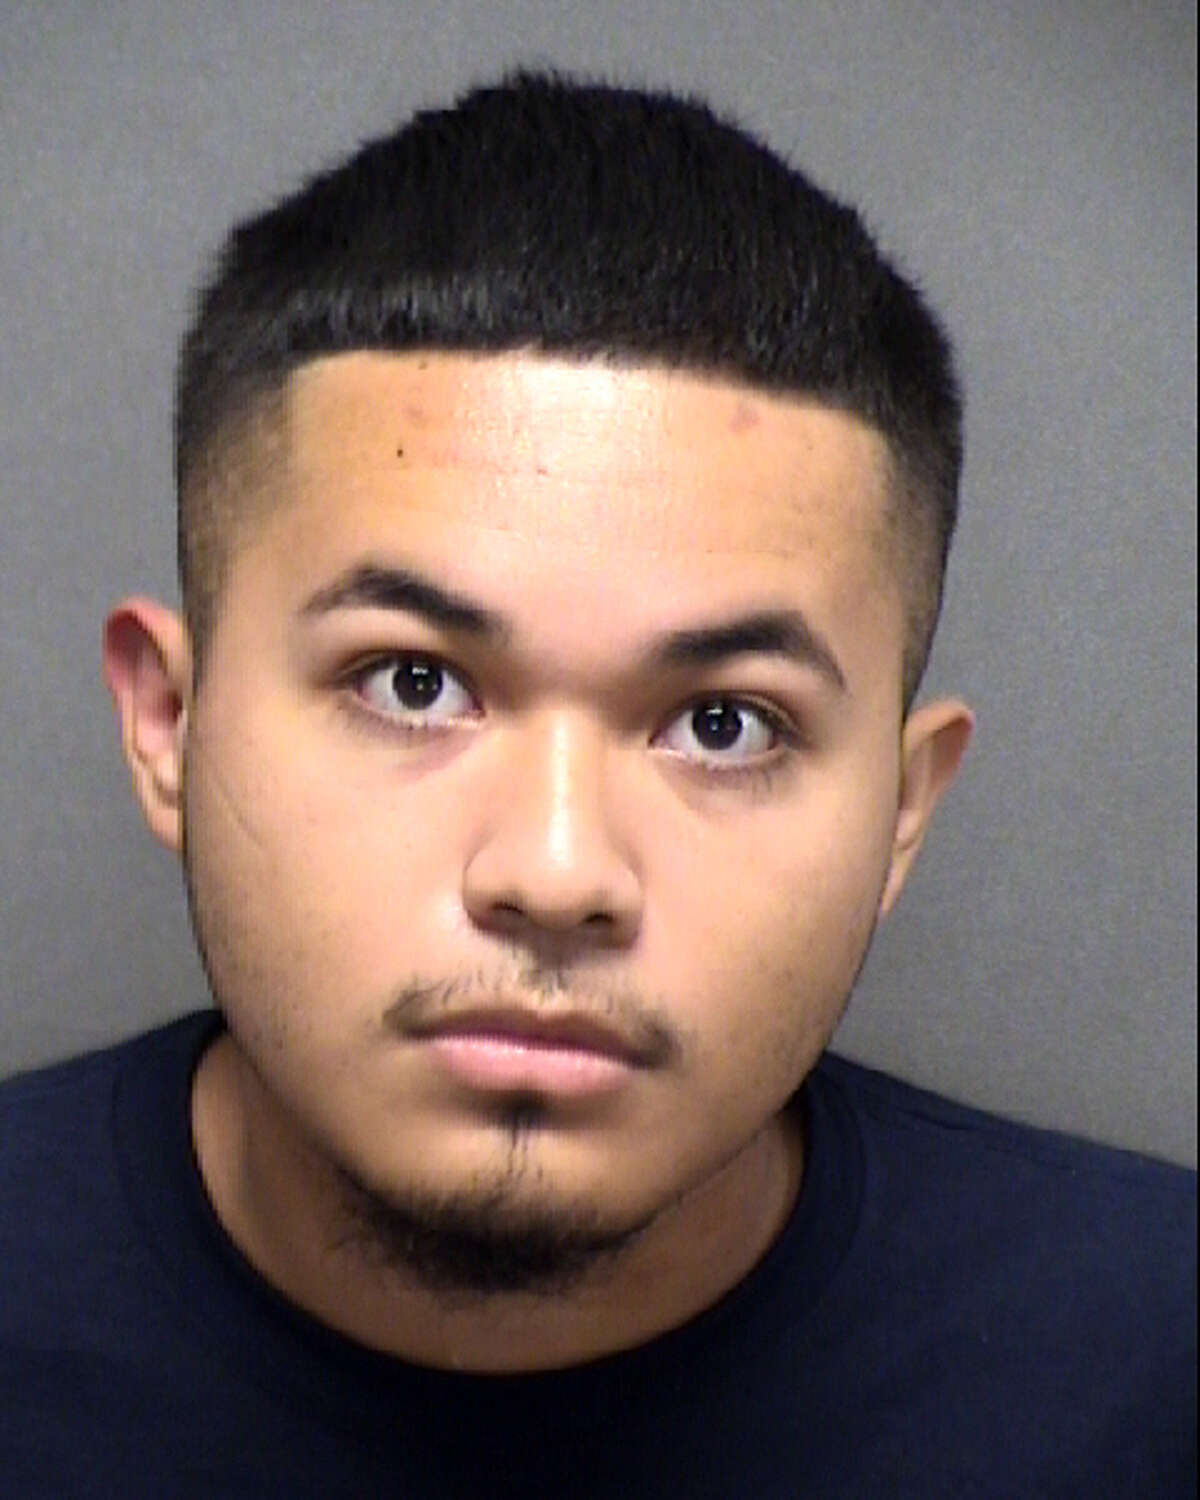 Thomas Esquivel, 19, was charged with endangering a child after videos surfaced of him giving a 3-year-old child a blunt, according to the Bexar County Sheriff's Office.